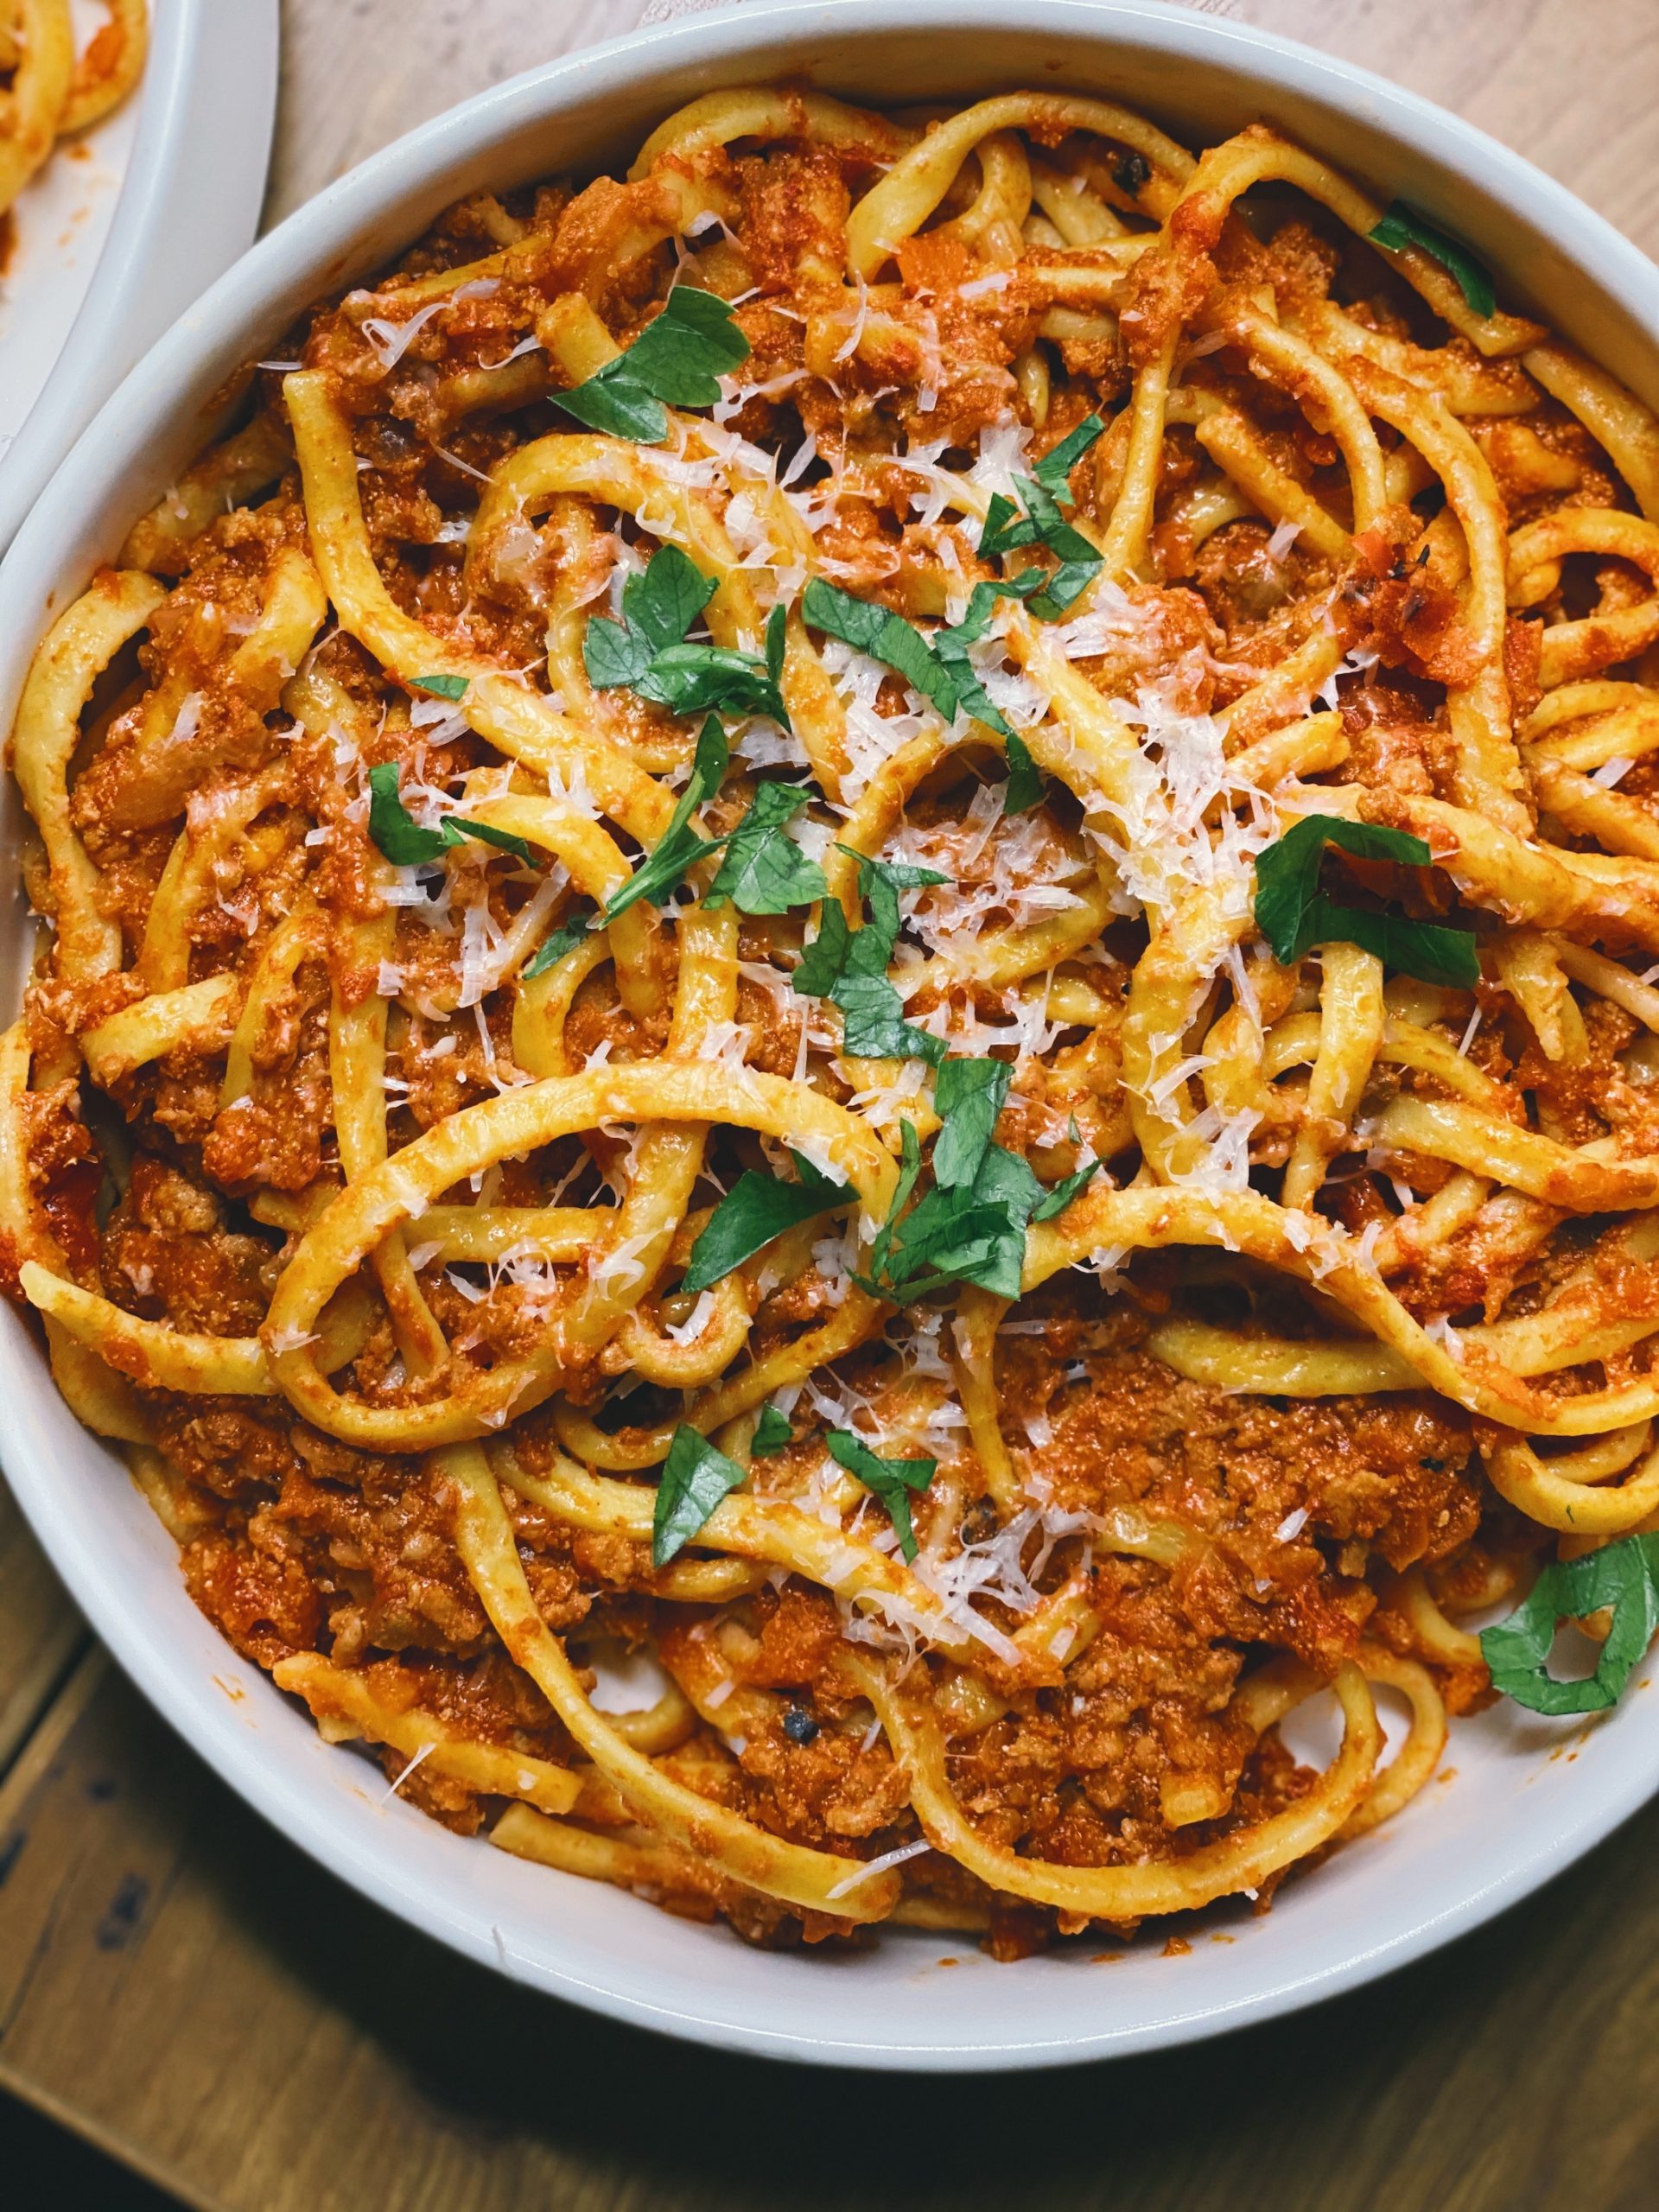 a big bowl of fettuccine with homemade bolognese sauce